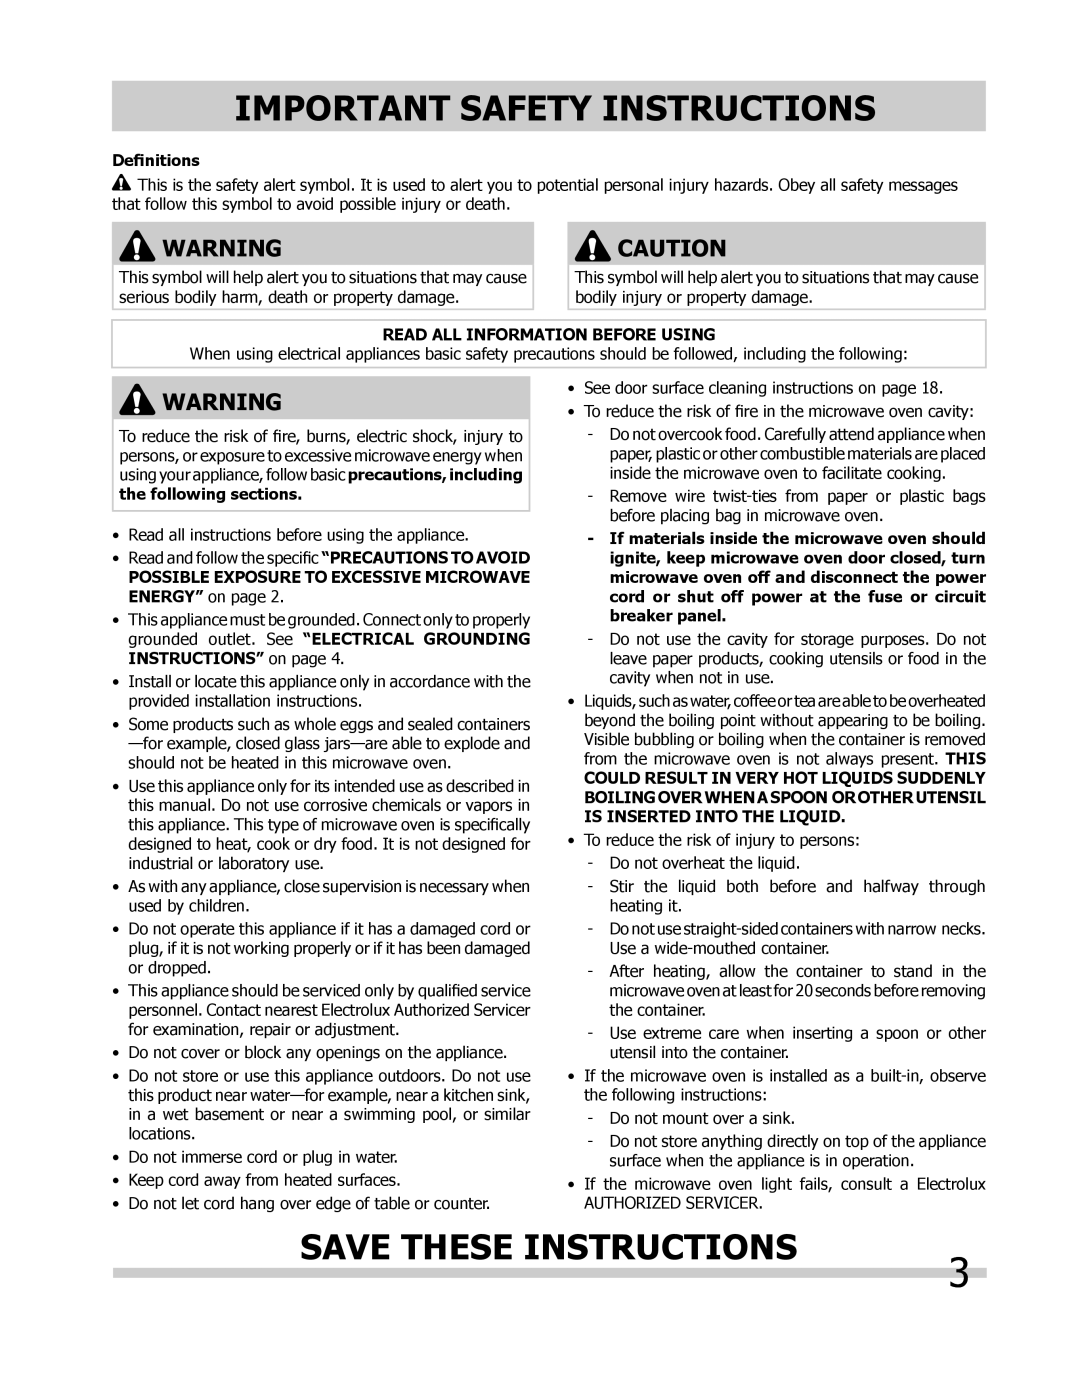 Frigidaire CGMO205kF, FPMO209, CPMO209kF, FGMO205 Important Safety Instructions, Save These Instructions, Definitions 